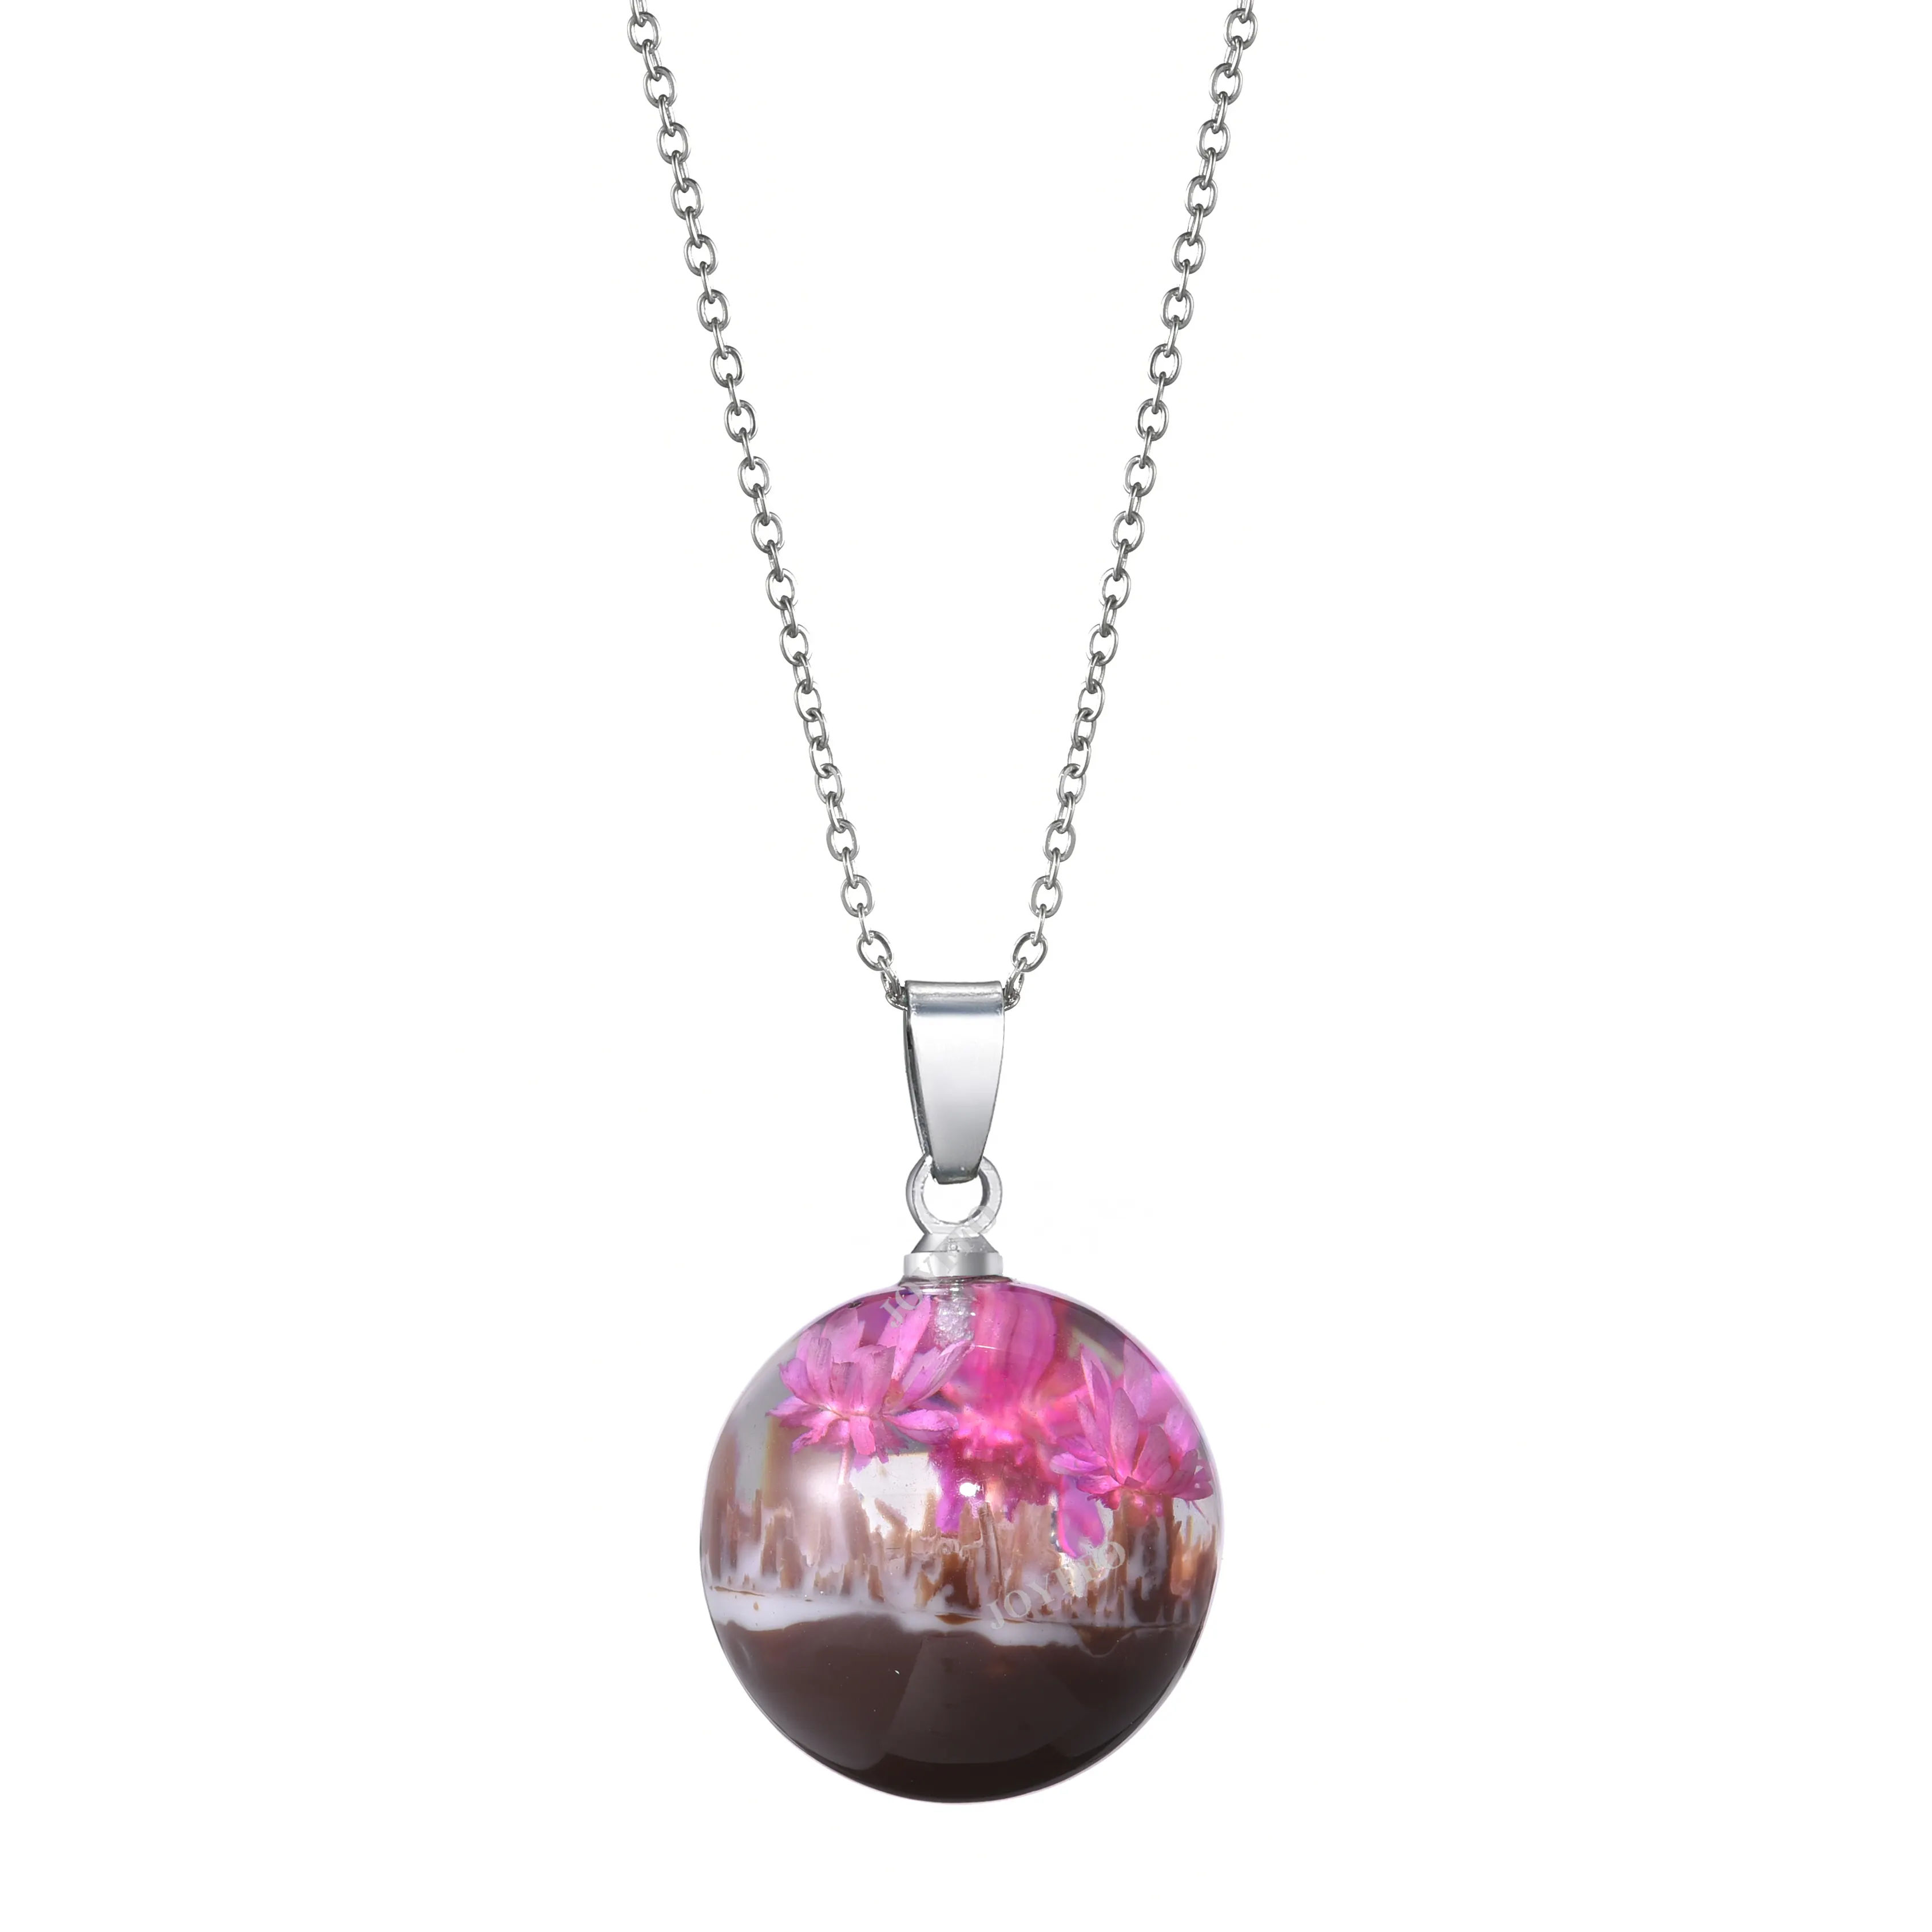 2023 Japanese Korea Style Silver Chain Crystal Necklaces Real Pressed Dried Flower Round Pendant Gold Plated Resin Necklace